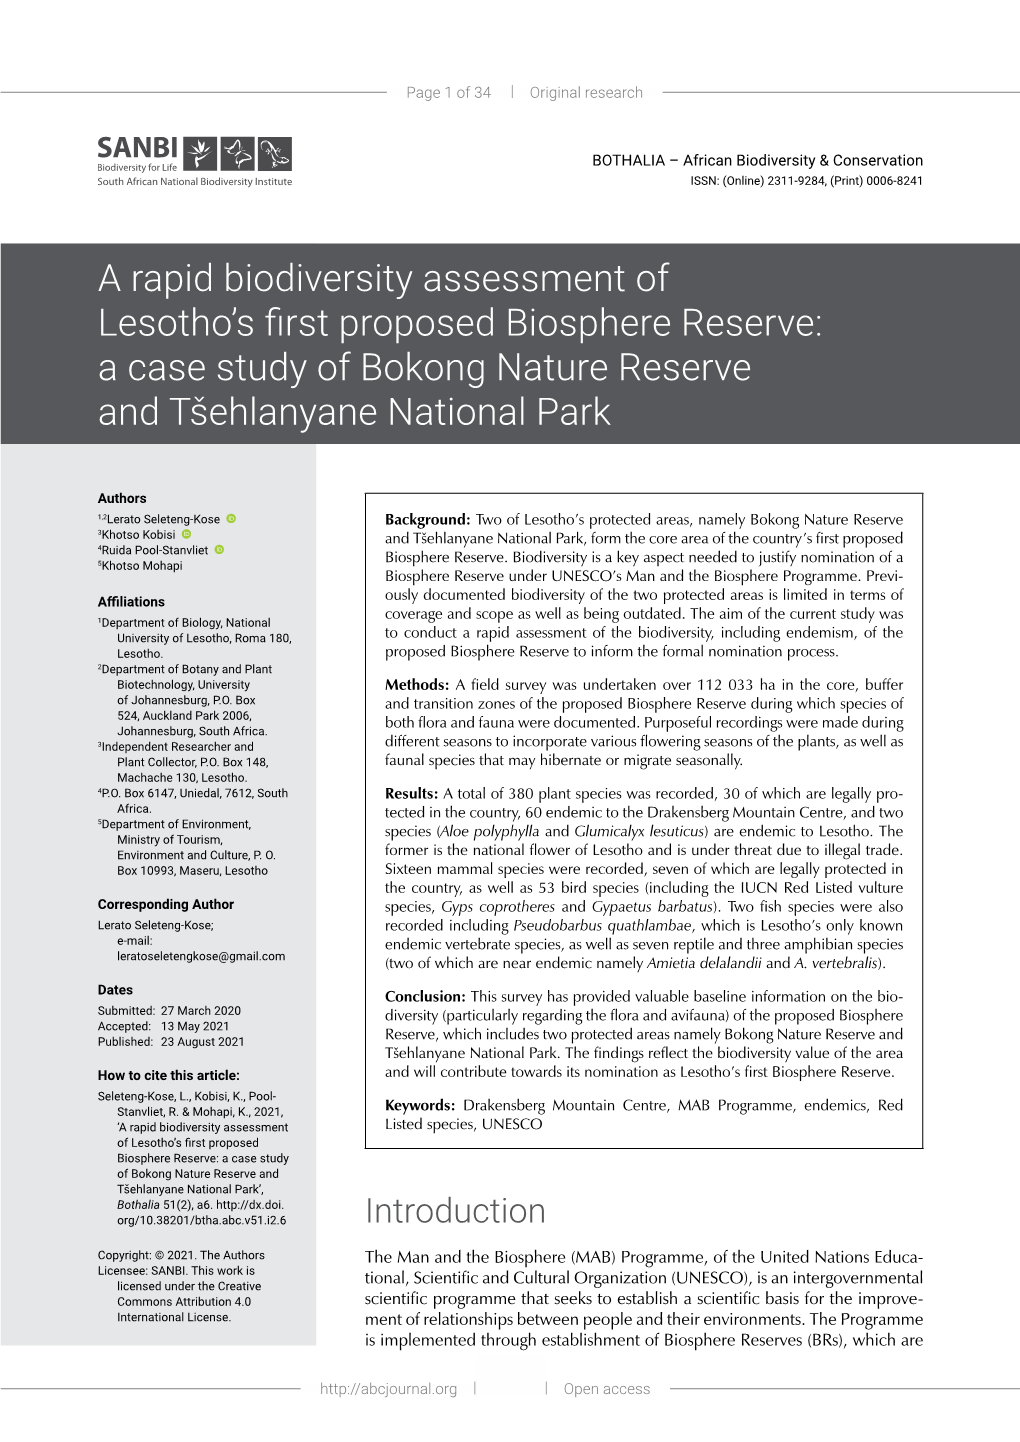 A Rapid Biodiversity Assessment of Lesotho's First Proposed